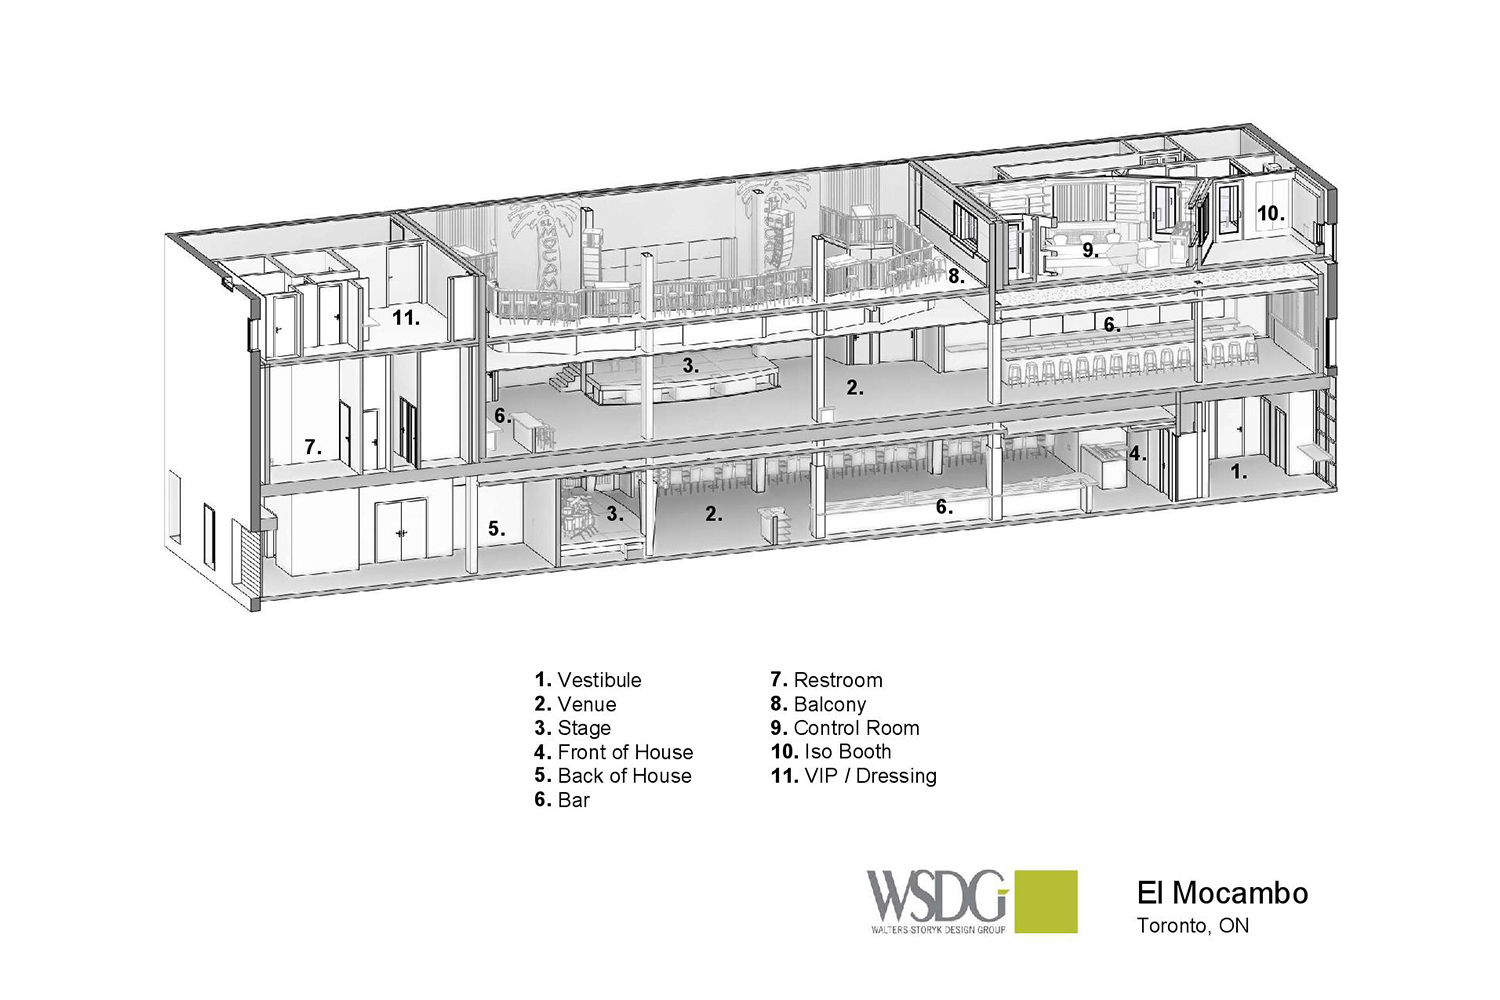 El Mocambo legendary club in Canada. Remodeled my Michael Wekerle. Acoustics and axonometric view drawing by WSDG.